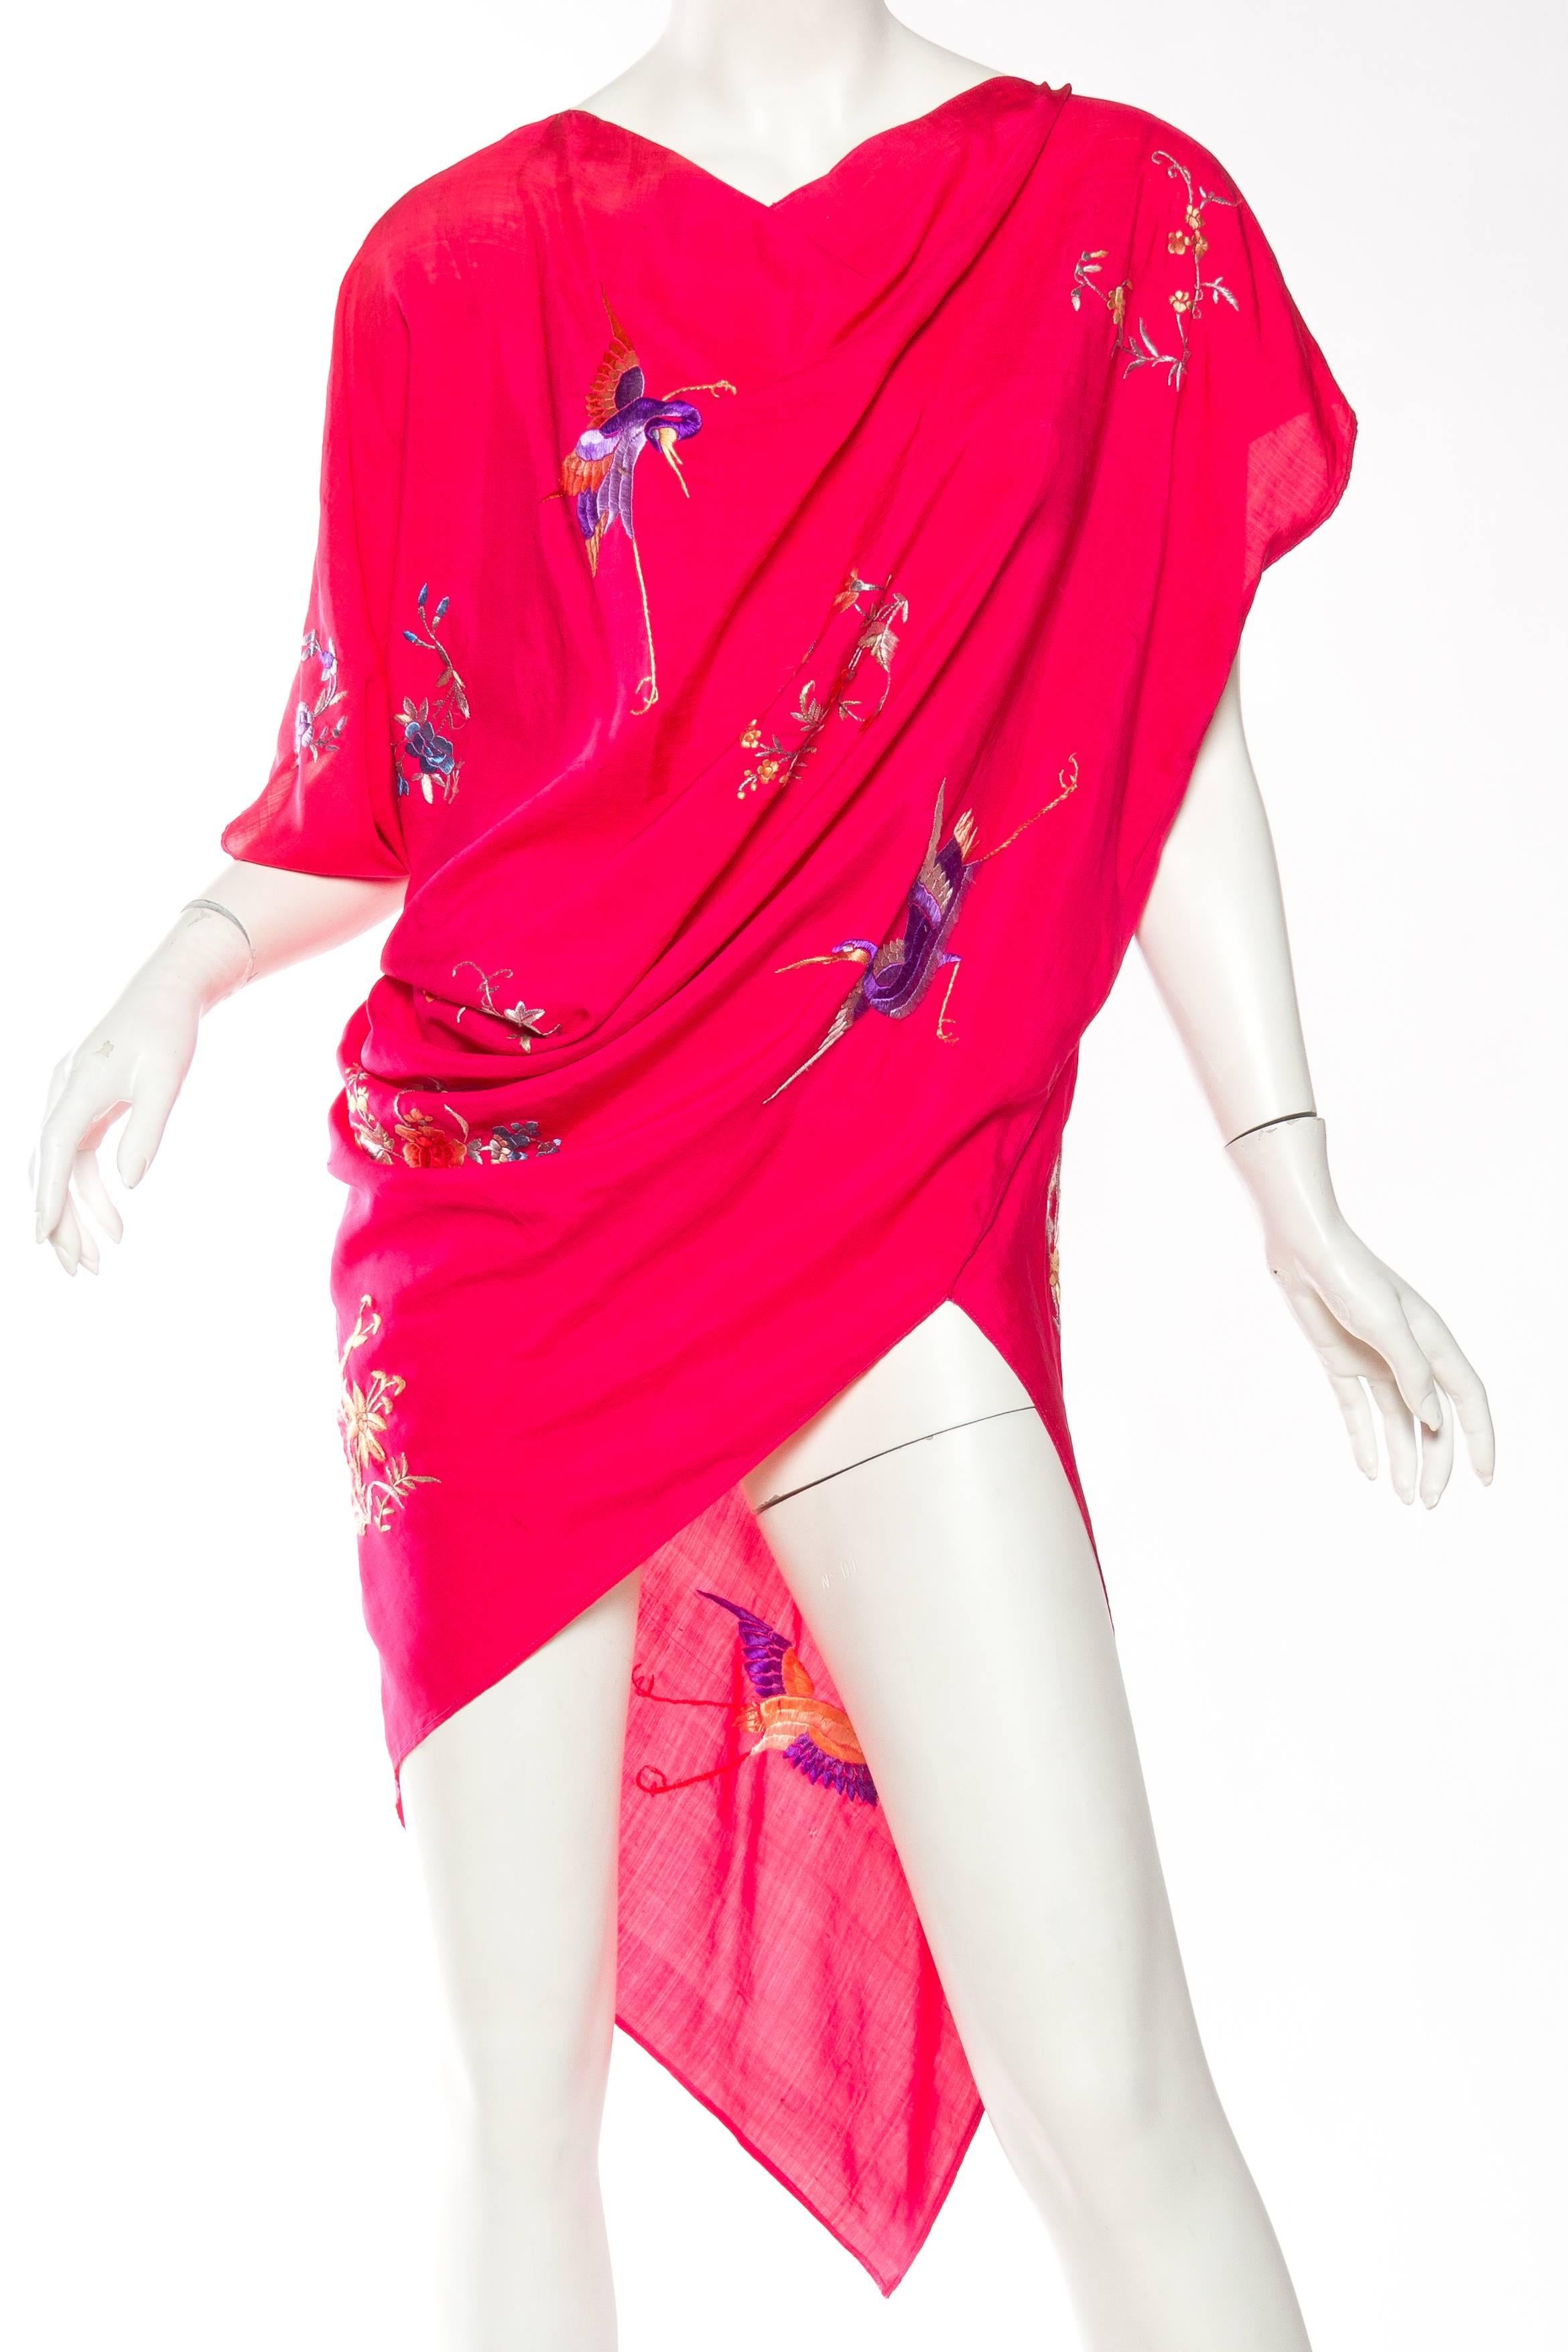 This is a wonderful tunic from the 1940s, constructed of fabric made in India or China. Made of an incredible lightweight silk in the brightest fuschia hue, it is embroidered all over with flowers and birds in shades of amethyst, green, gold, blue,